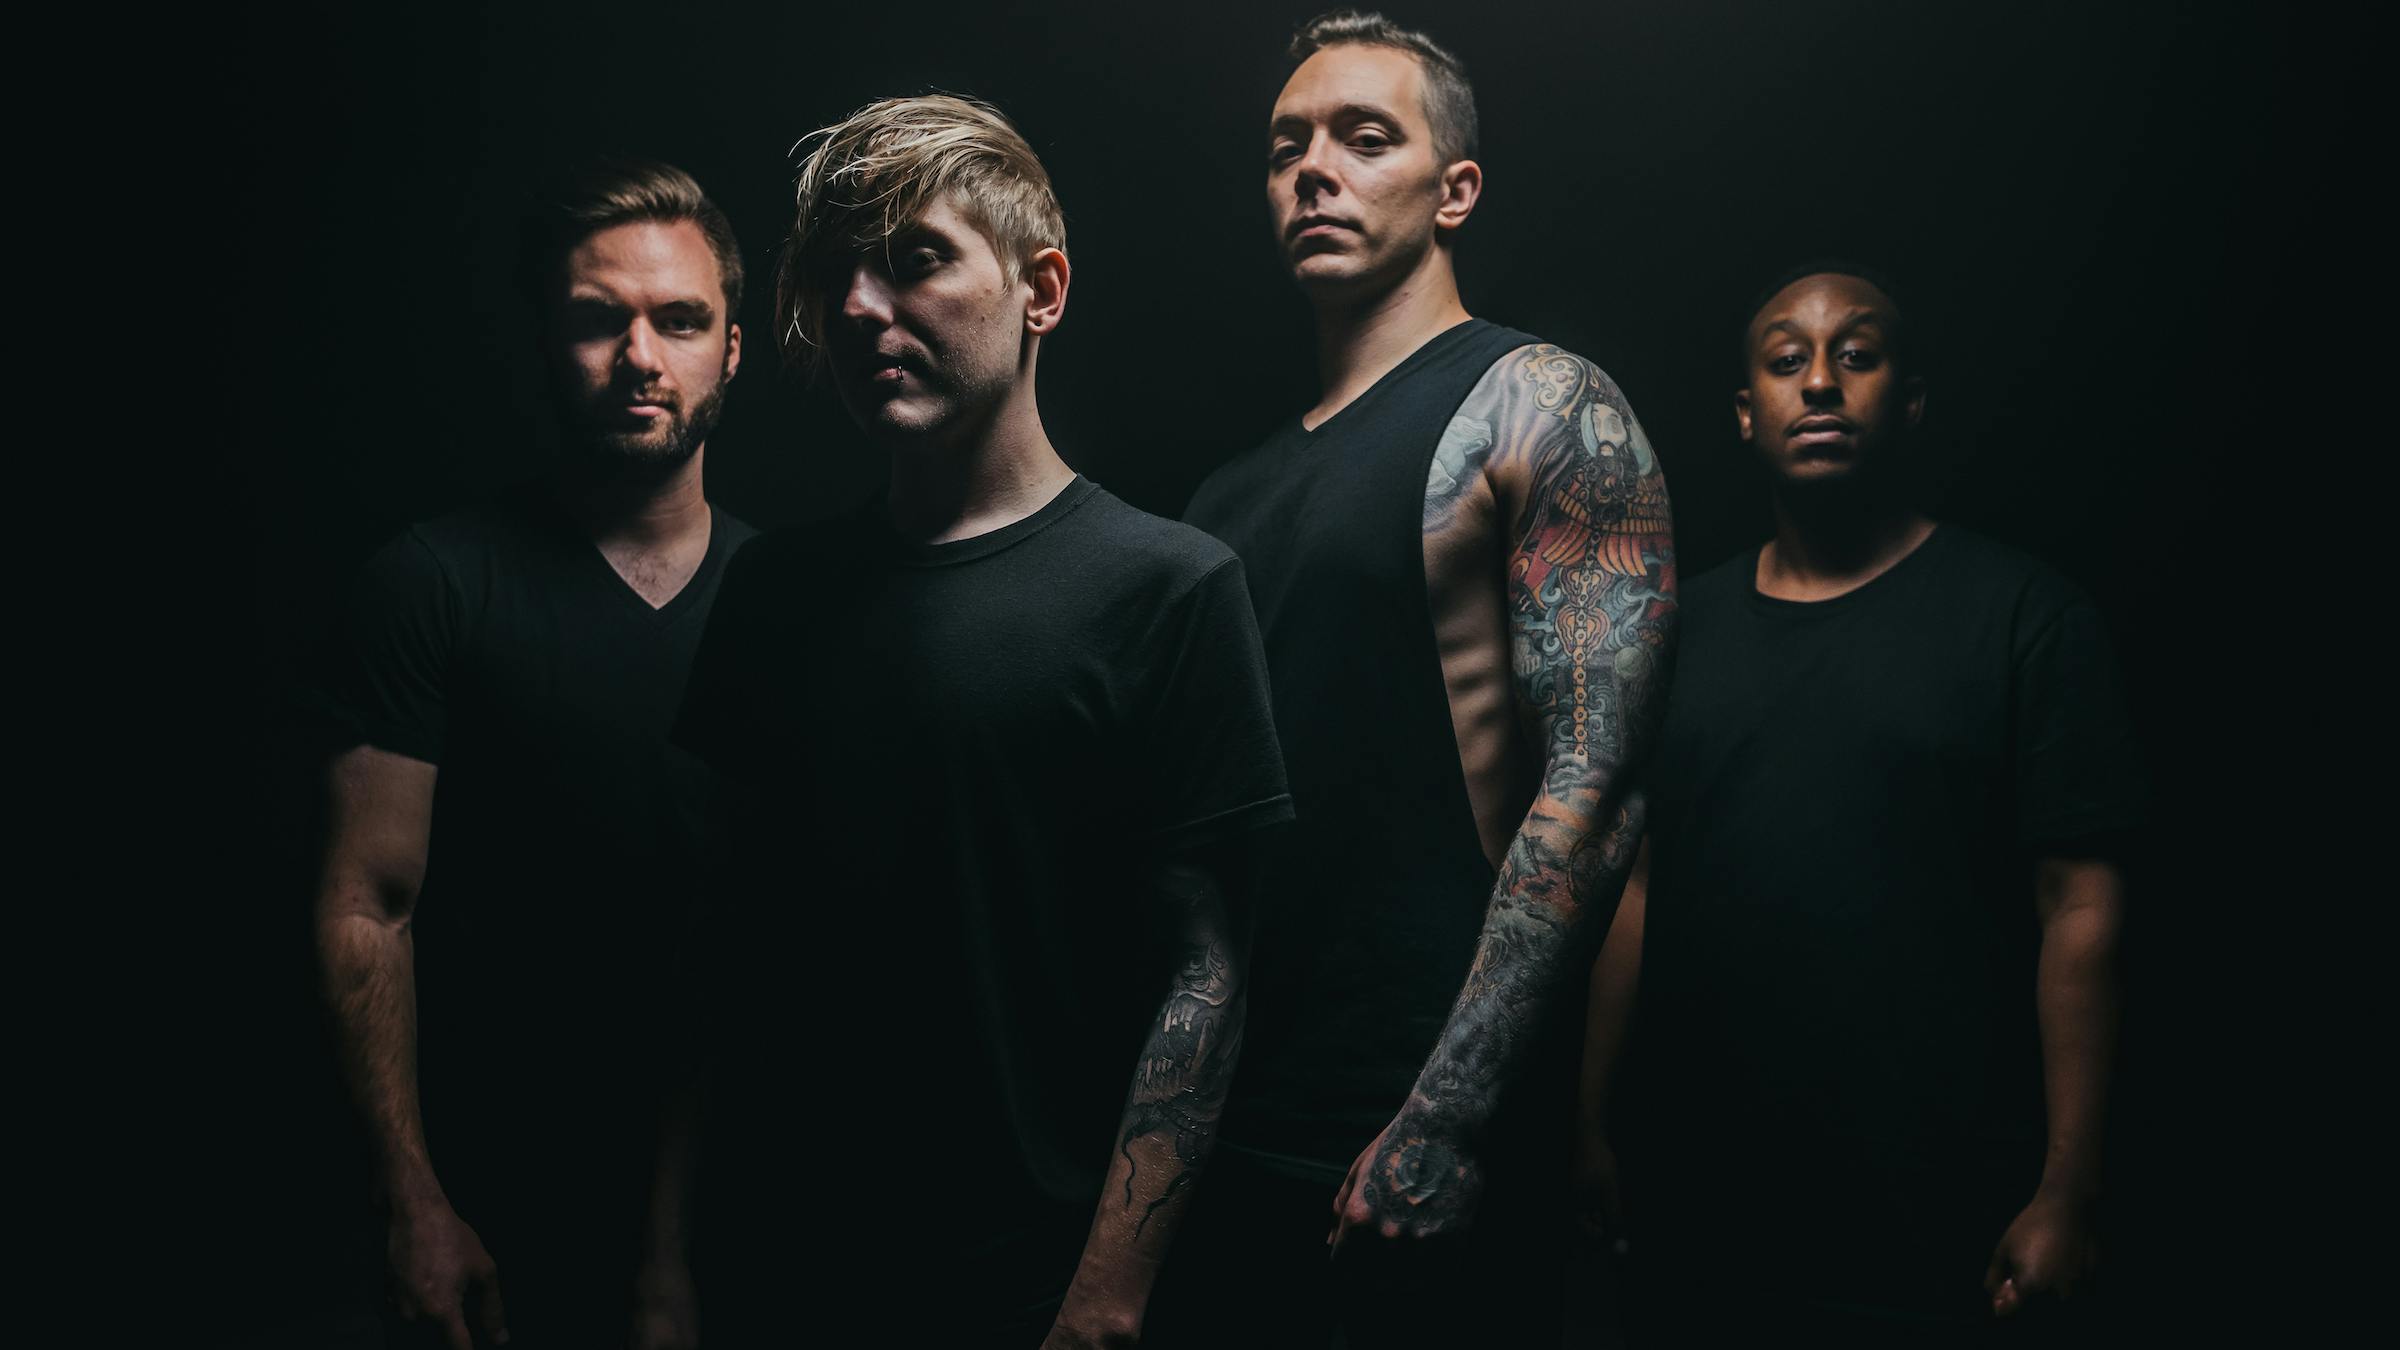 Exclusive: Enterprise Earth Embrace Darkness In New Video